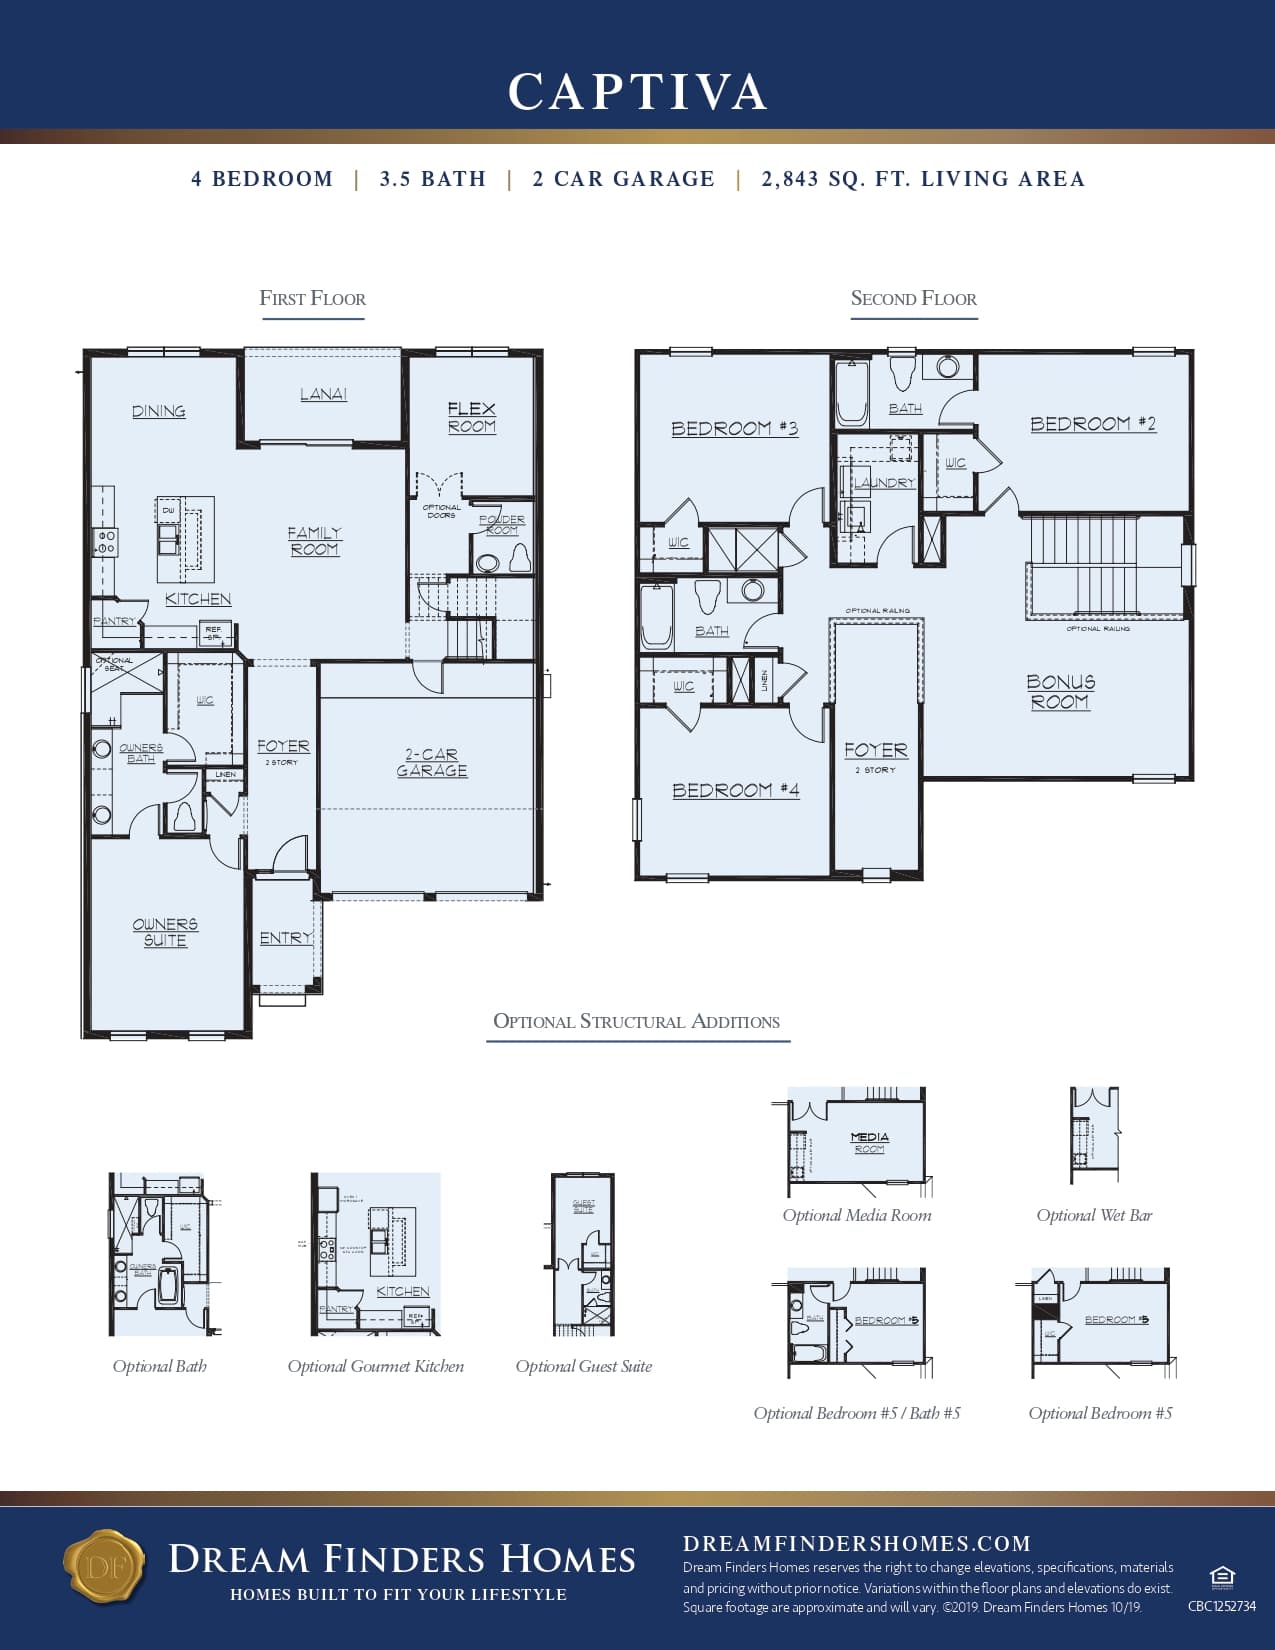 Captiva house plan by Dream Finders Homes.